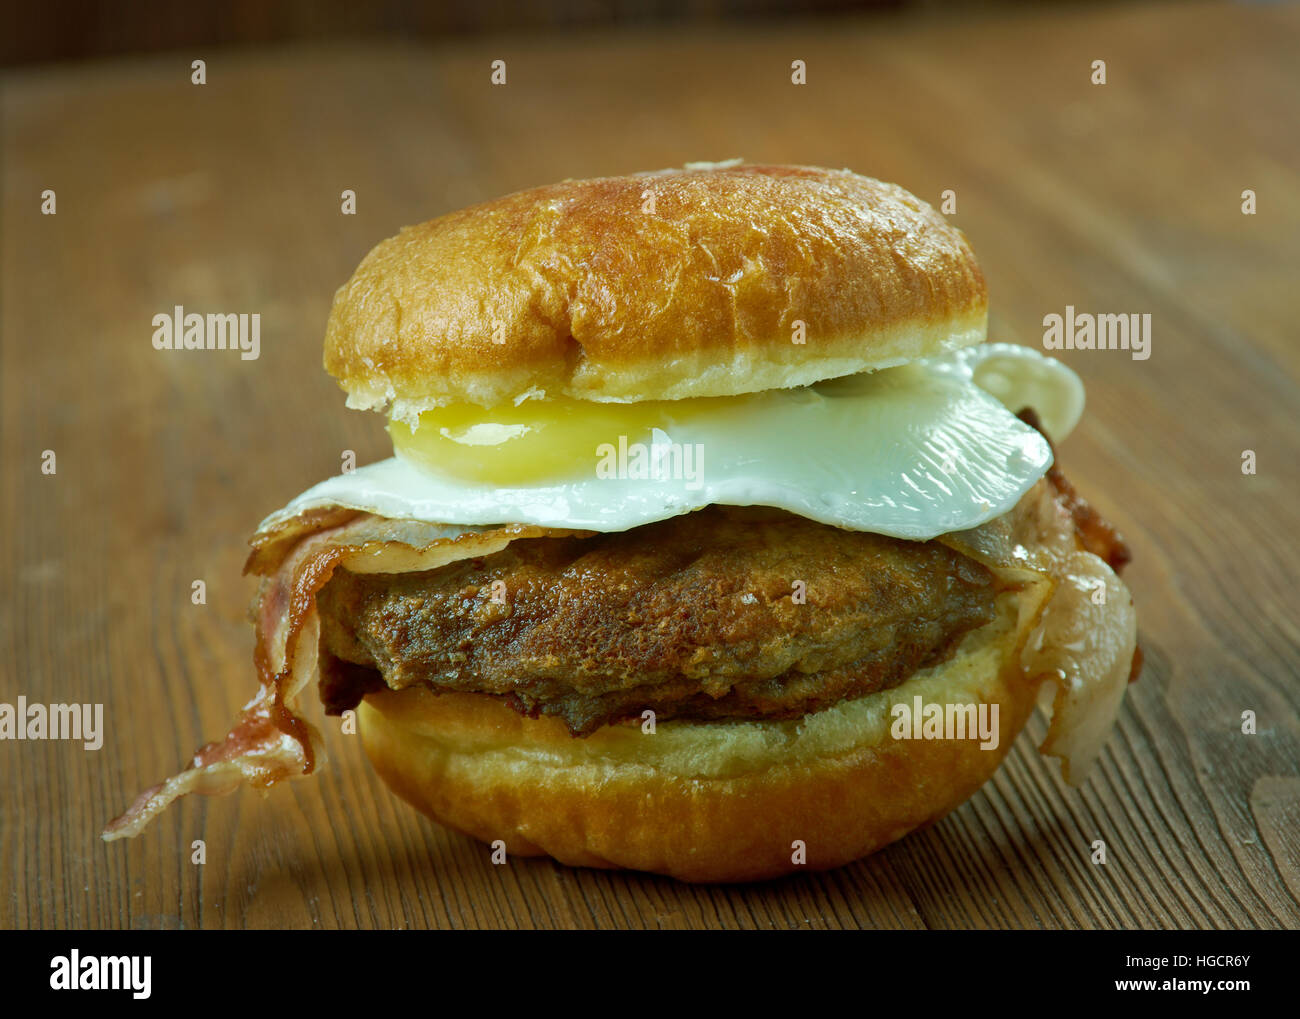 Luther Burger - hamburger or cheeseburger with one or more glazed doughnuts in place of the bun. Stock Photo